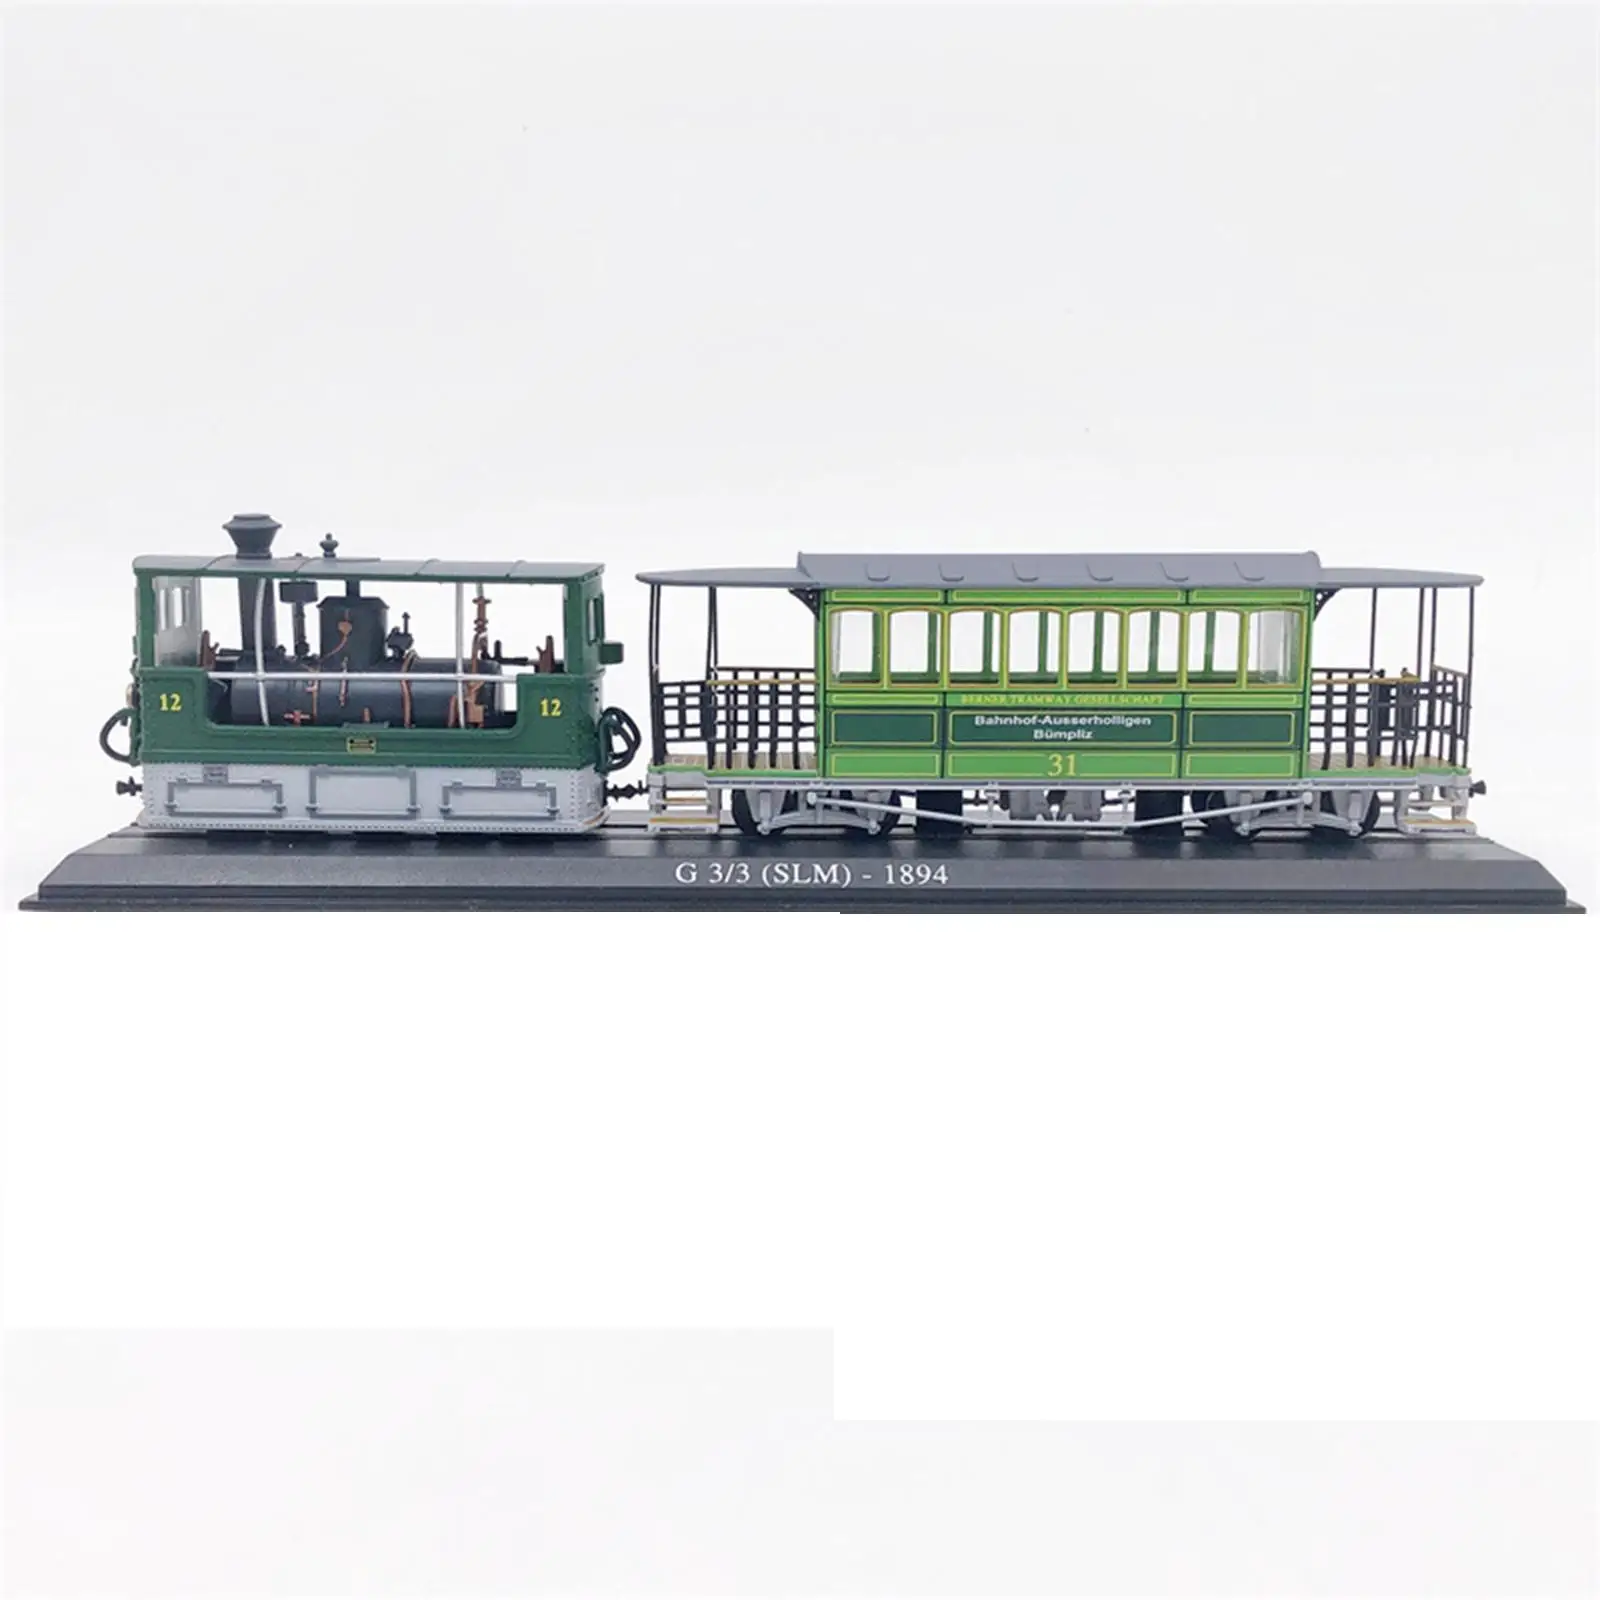 1/87 Scale Steam Train Model Decorative Collectibles Party Favors for Beginners Girls Boys